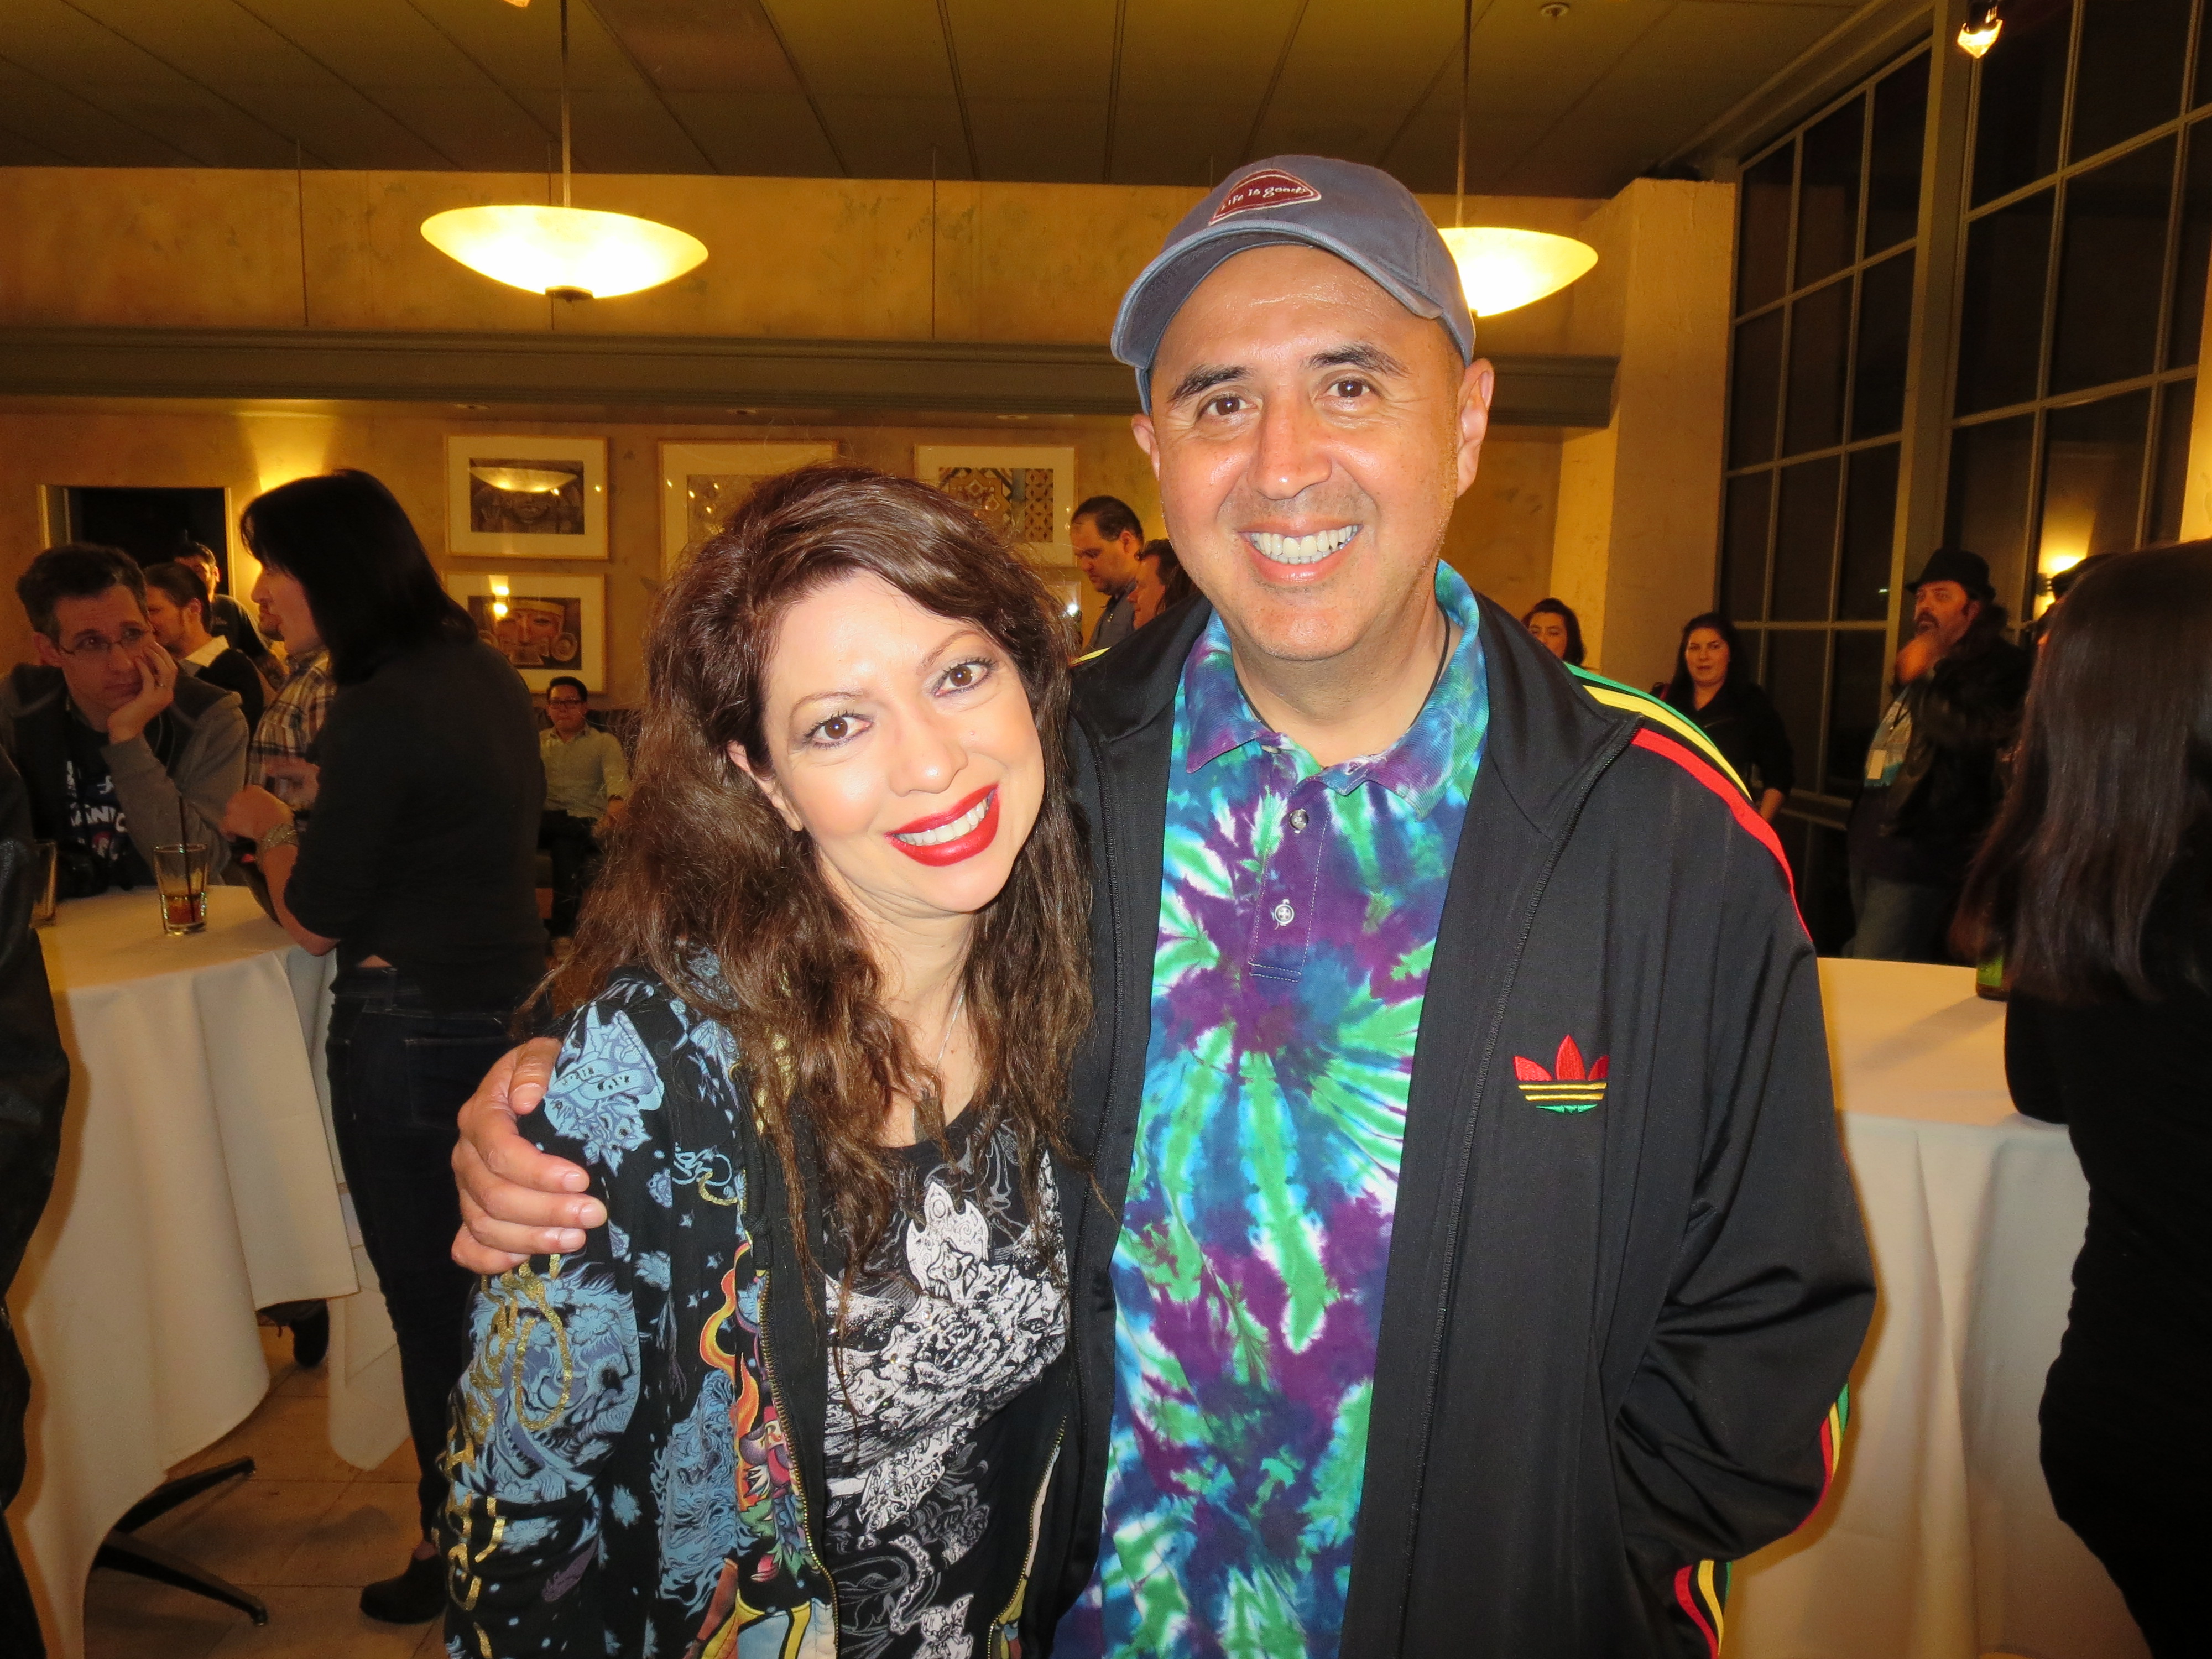 Debra Lamb with husband Eric Archuleta at the Twisted Terror Convention, March 29th, 2014 held at the DoubleTree Hotel, Sacramento, CA.